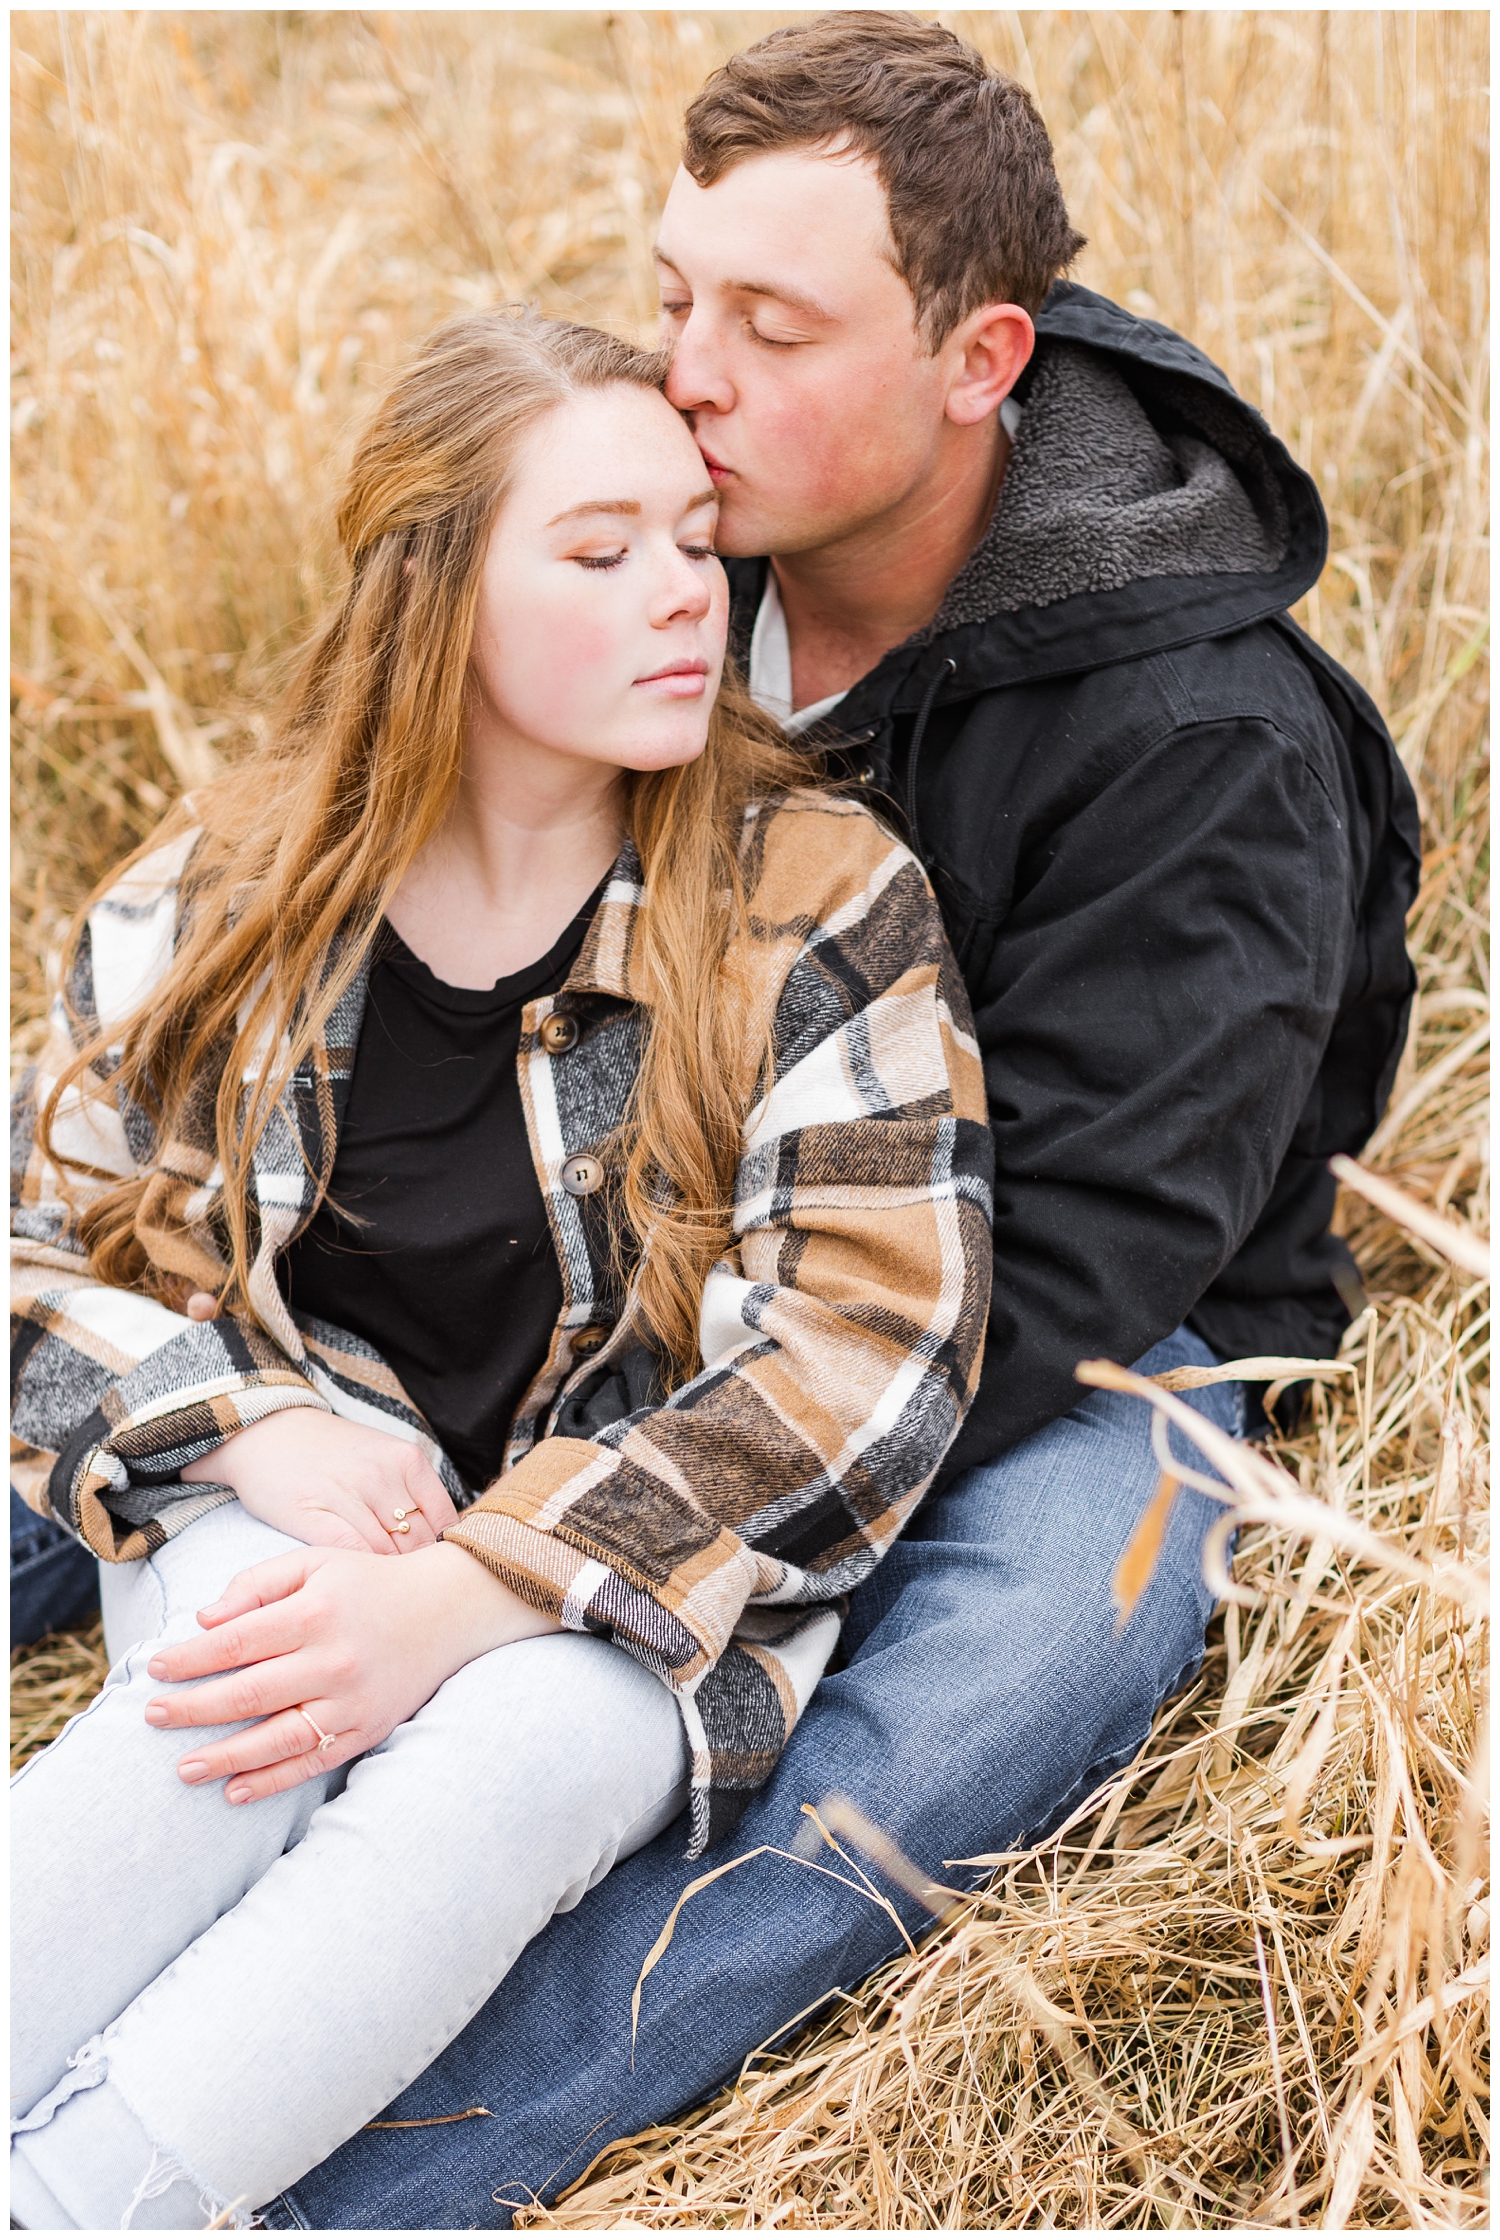 Travis snuggles his fiance Abi while sitting in a grassy filed in Iowa in the middle of winter | CB Studio